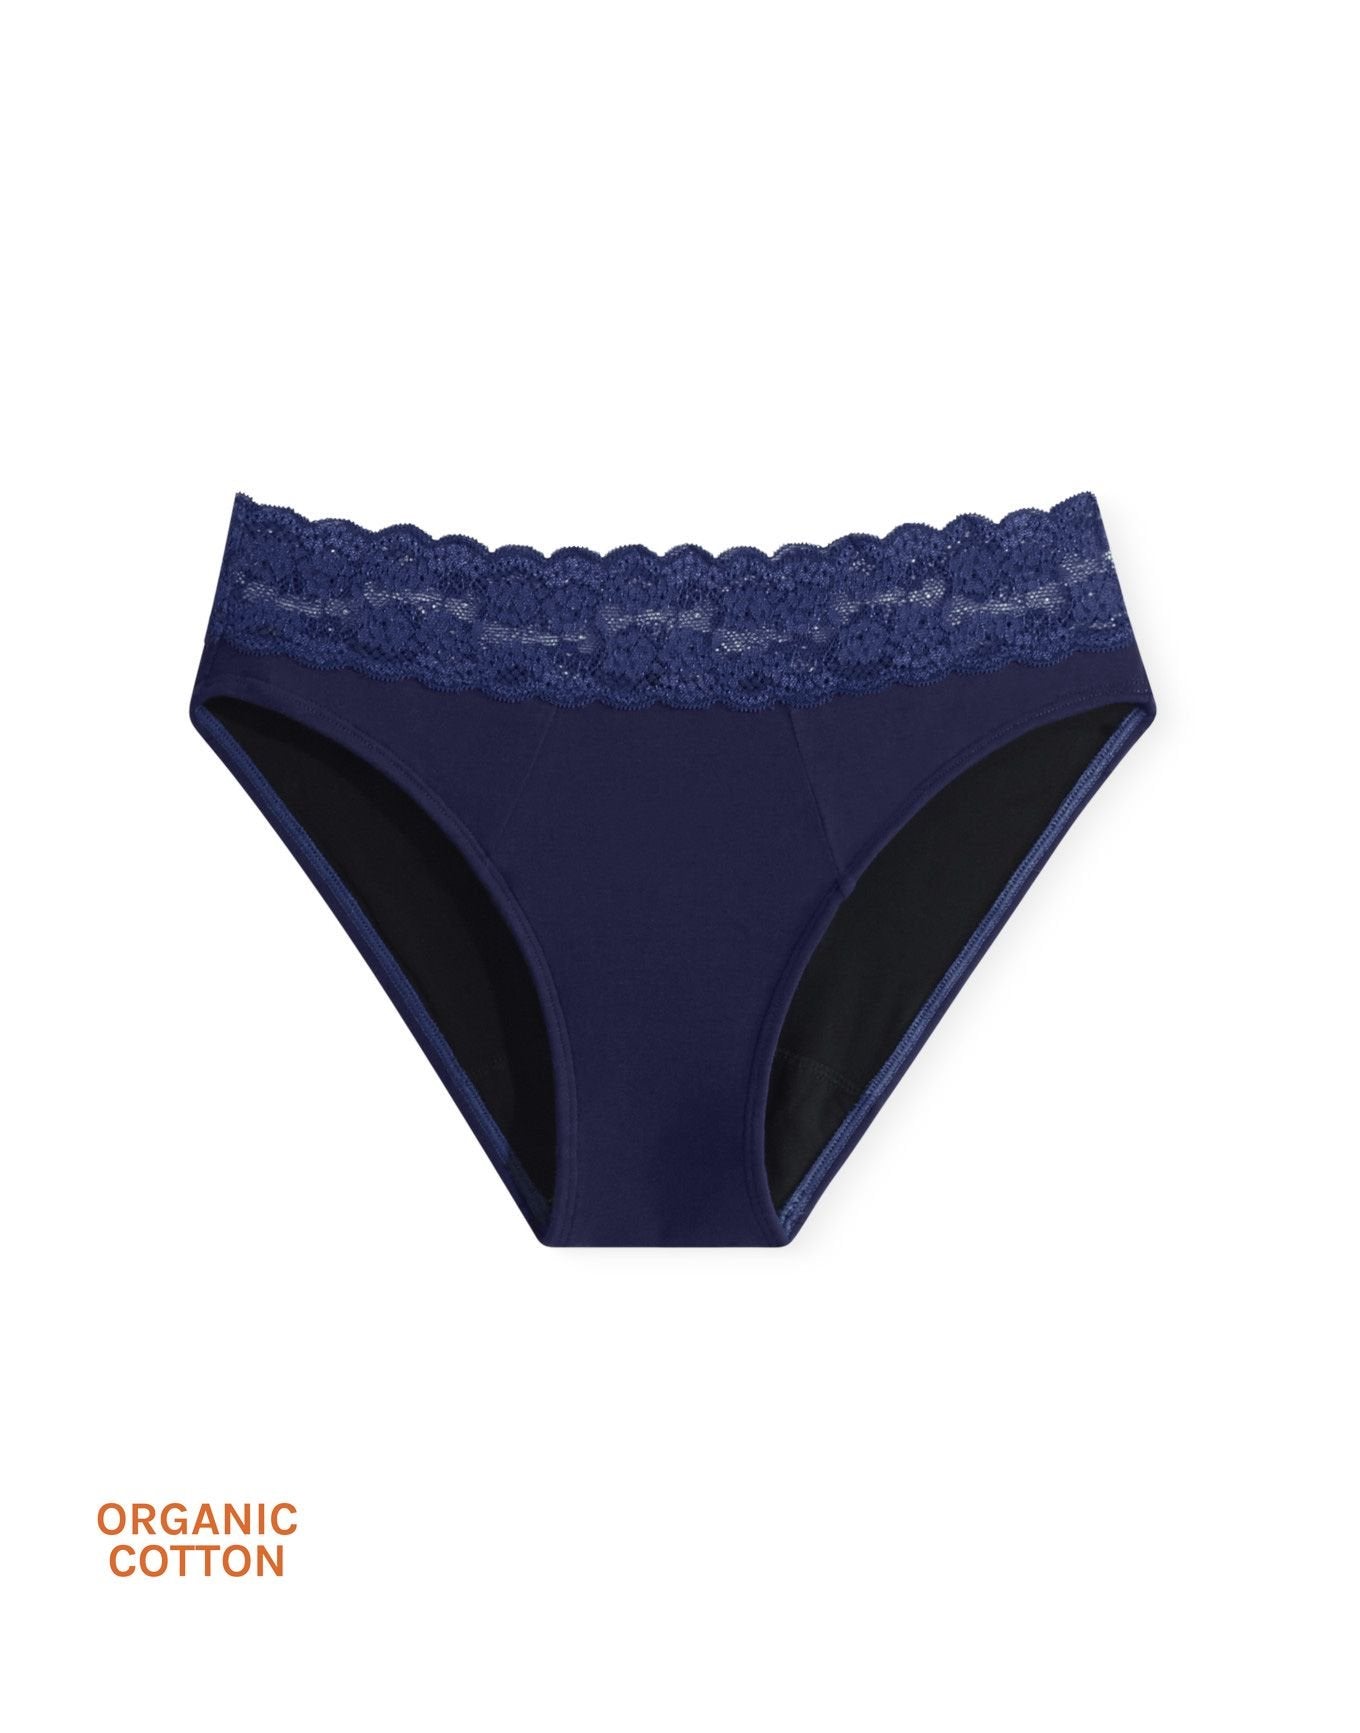 Cotton and Lace Cheeky Panty - Midnight blue